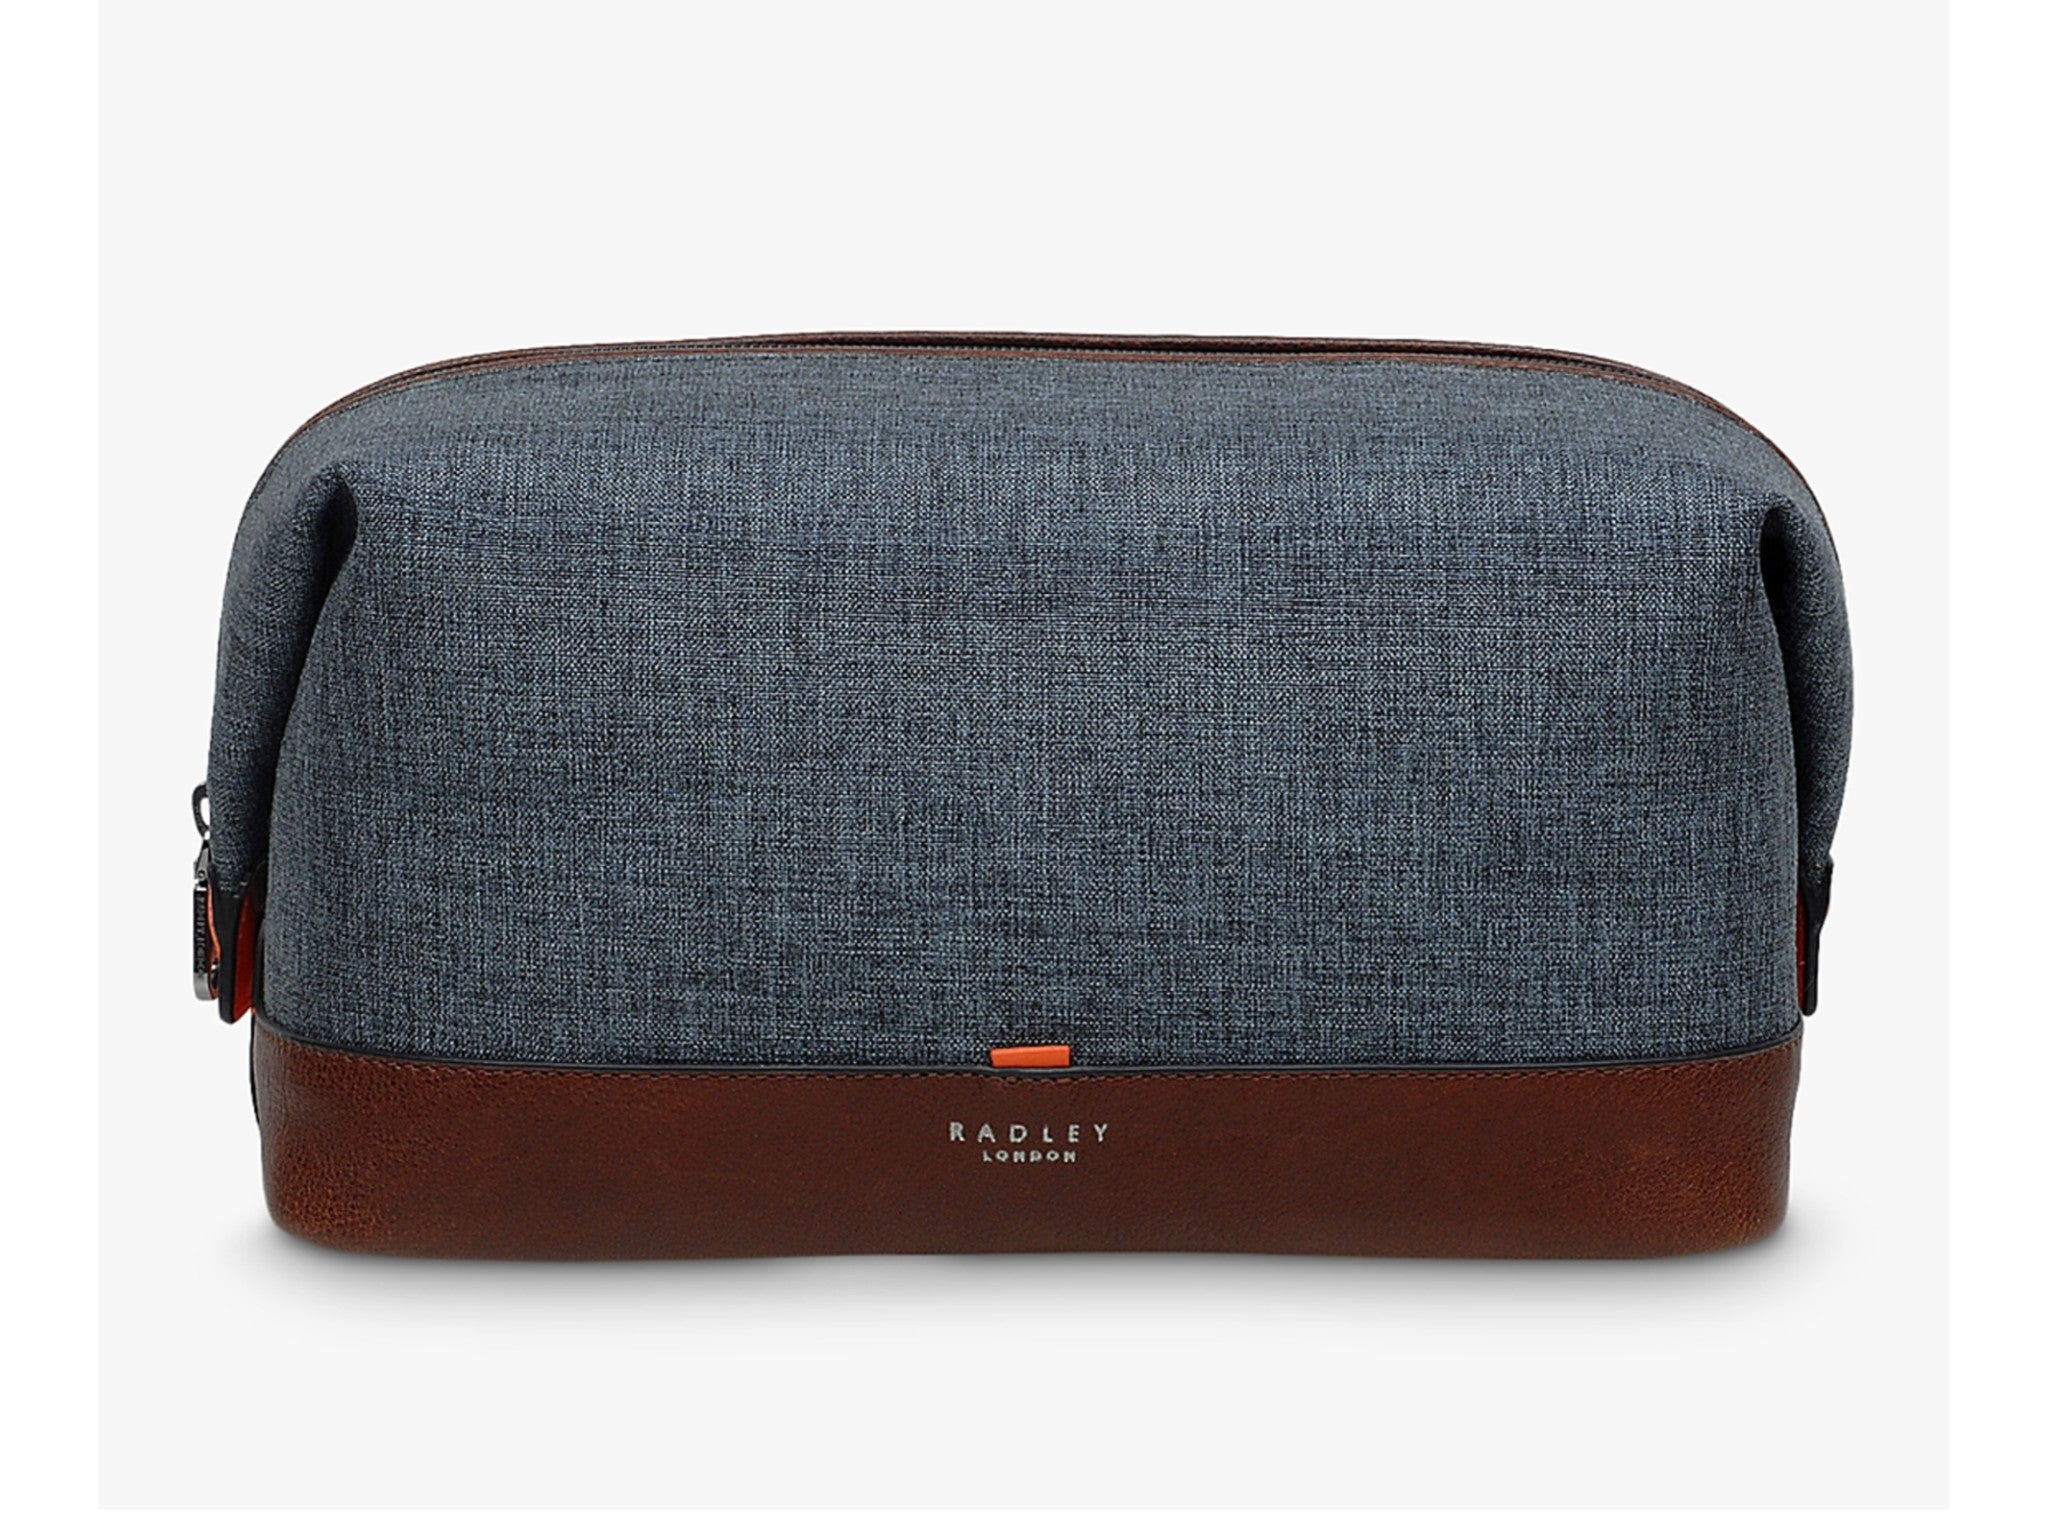 Best men's wash bag 2022: Designer and sustainable options | The Independent